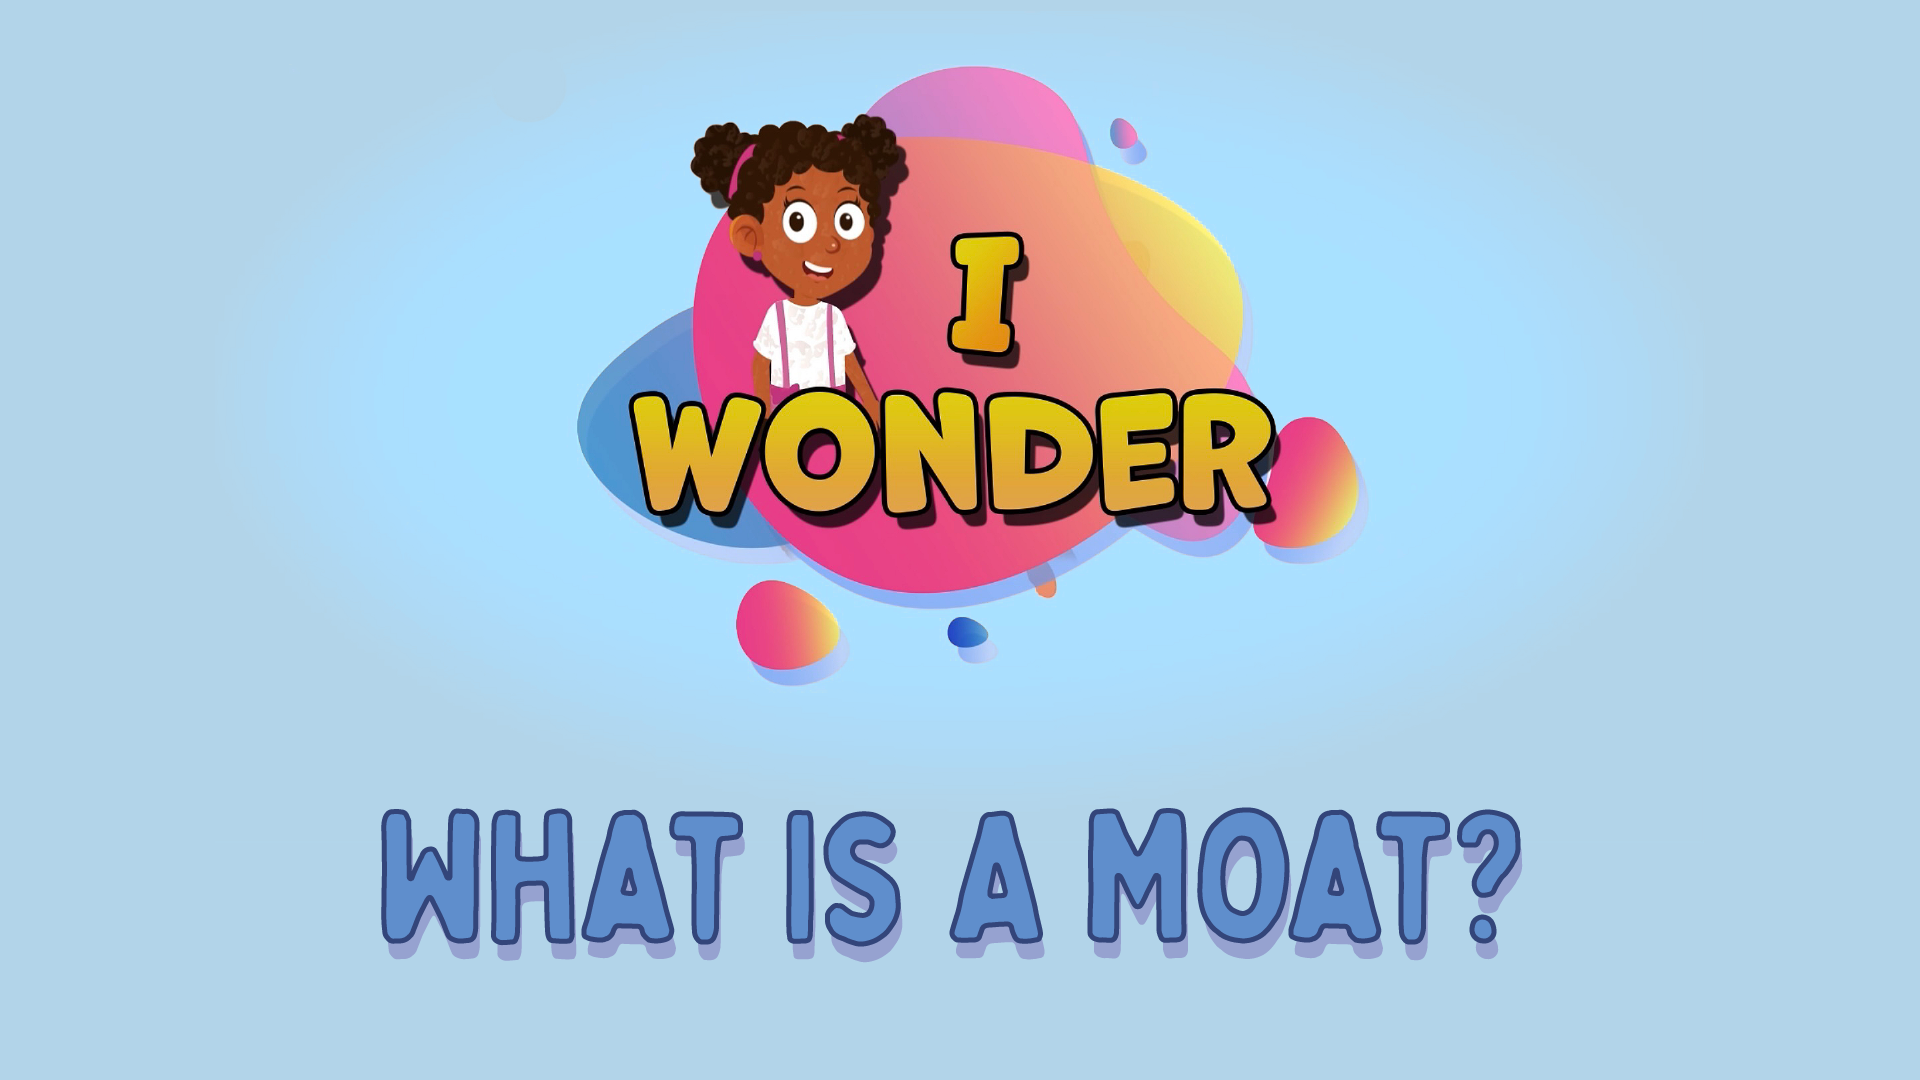 What Is A Moat?